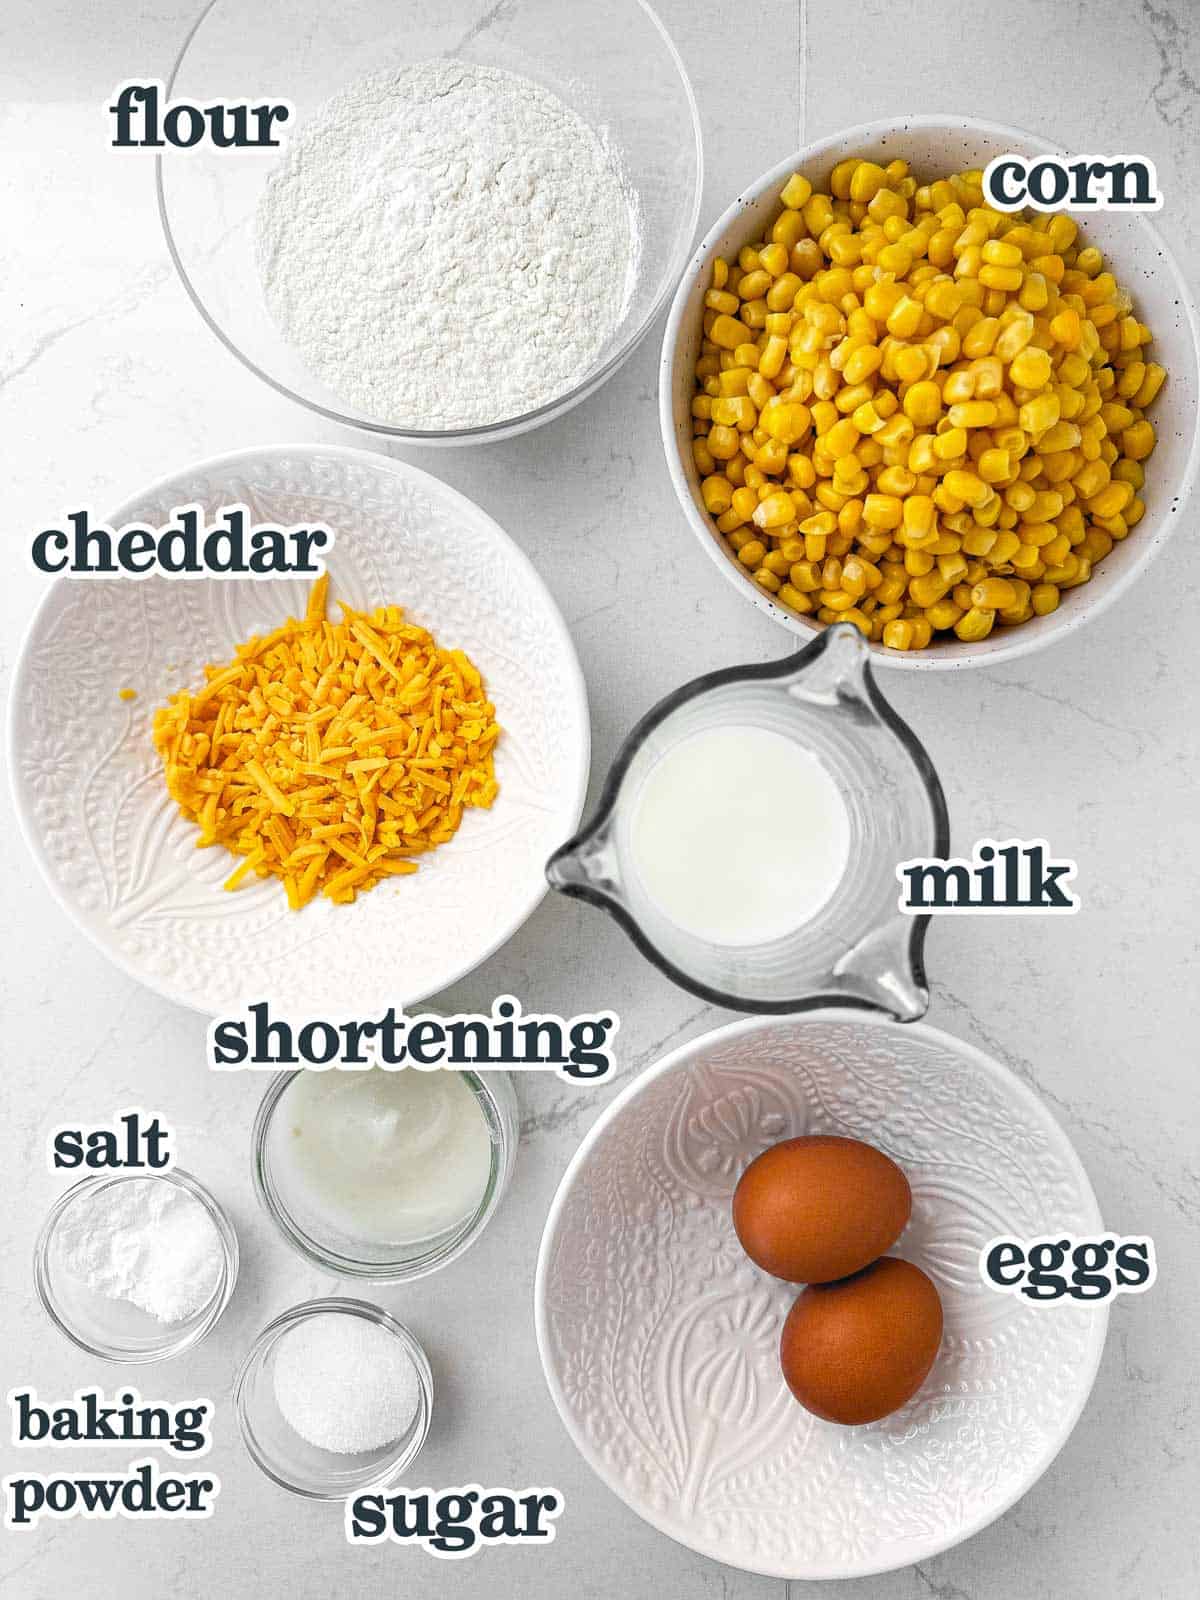 ingredients for corn fritters with text labels